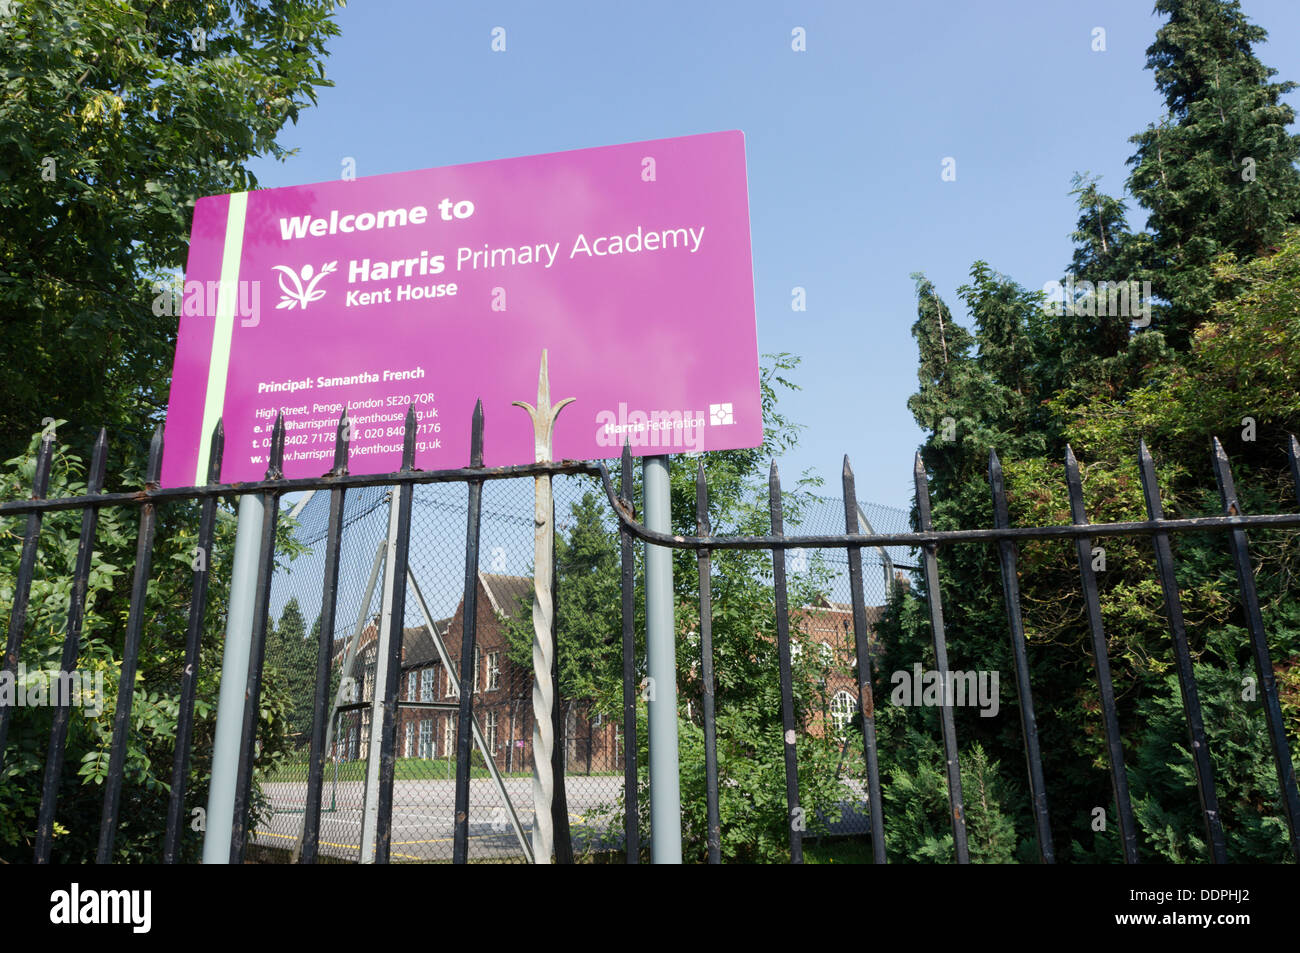 Harris Primary Academy, formerly Royston Primary School, in Kent House, south London. Stock Photo